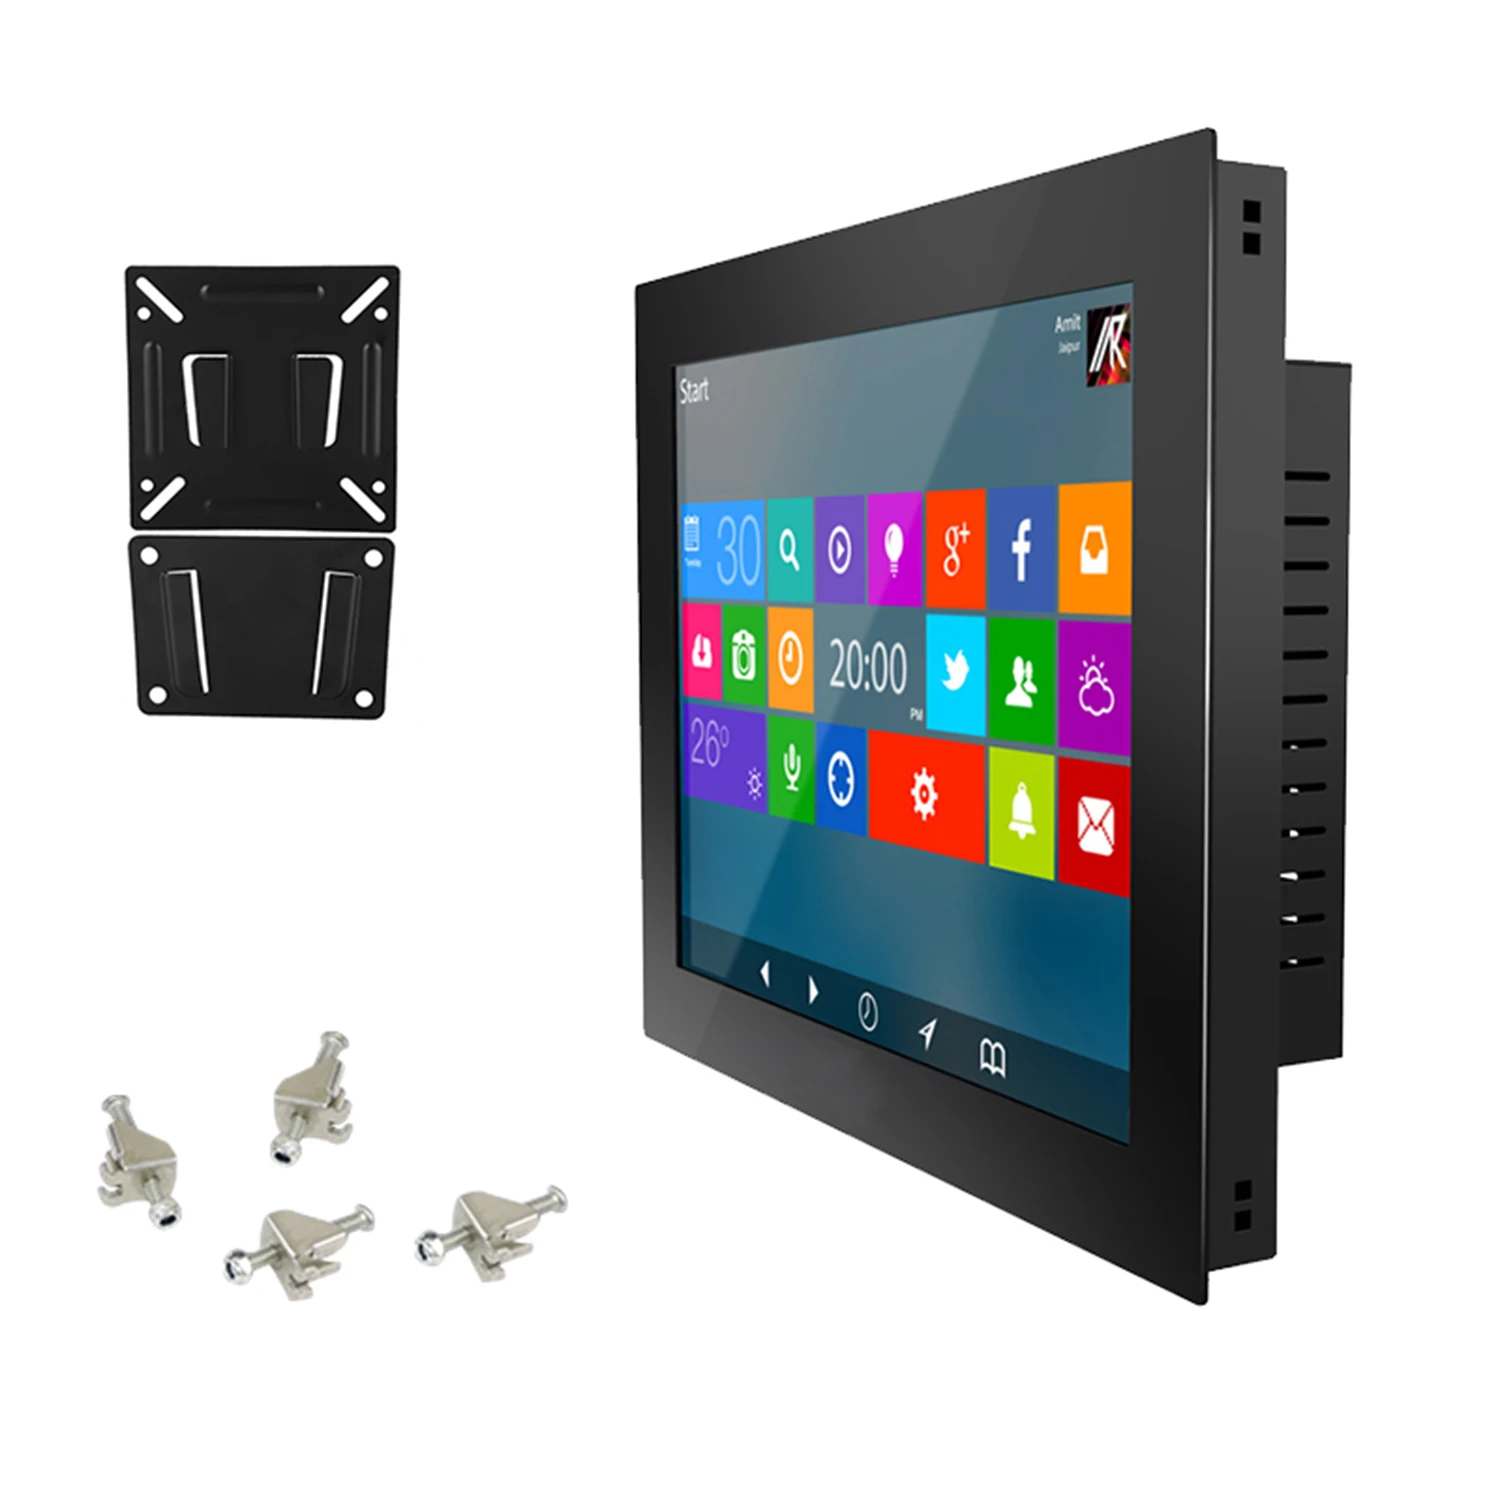 

18.5 19 23.6 Inch Embedded Tablet PC Panel All-in-one PC Industrial Computer with Resistive Touch Screen Built-in WiFi RS232 Com